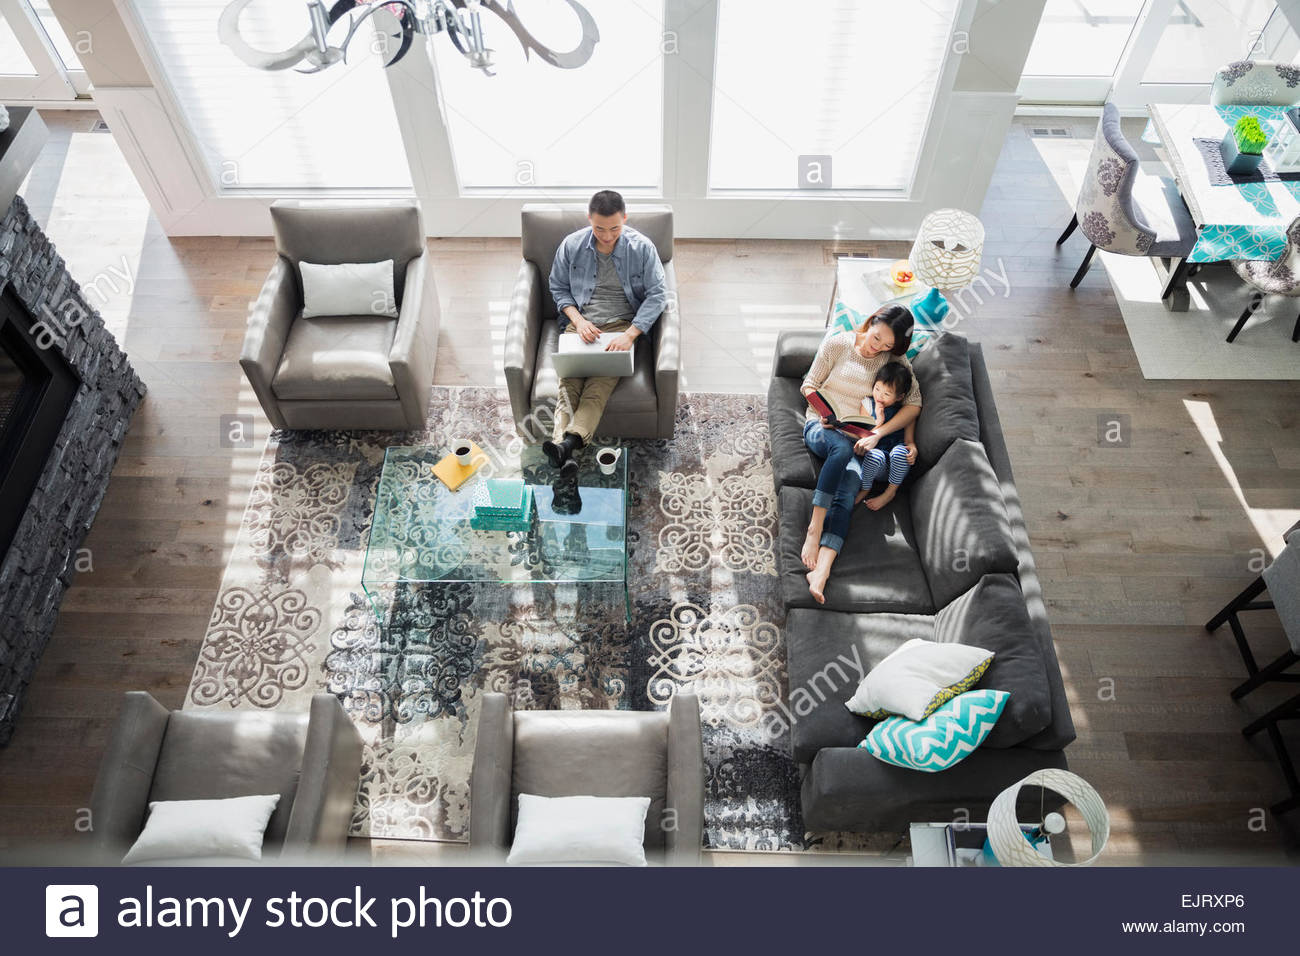 Overhead of family relaxing in living room Stock Photo